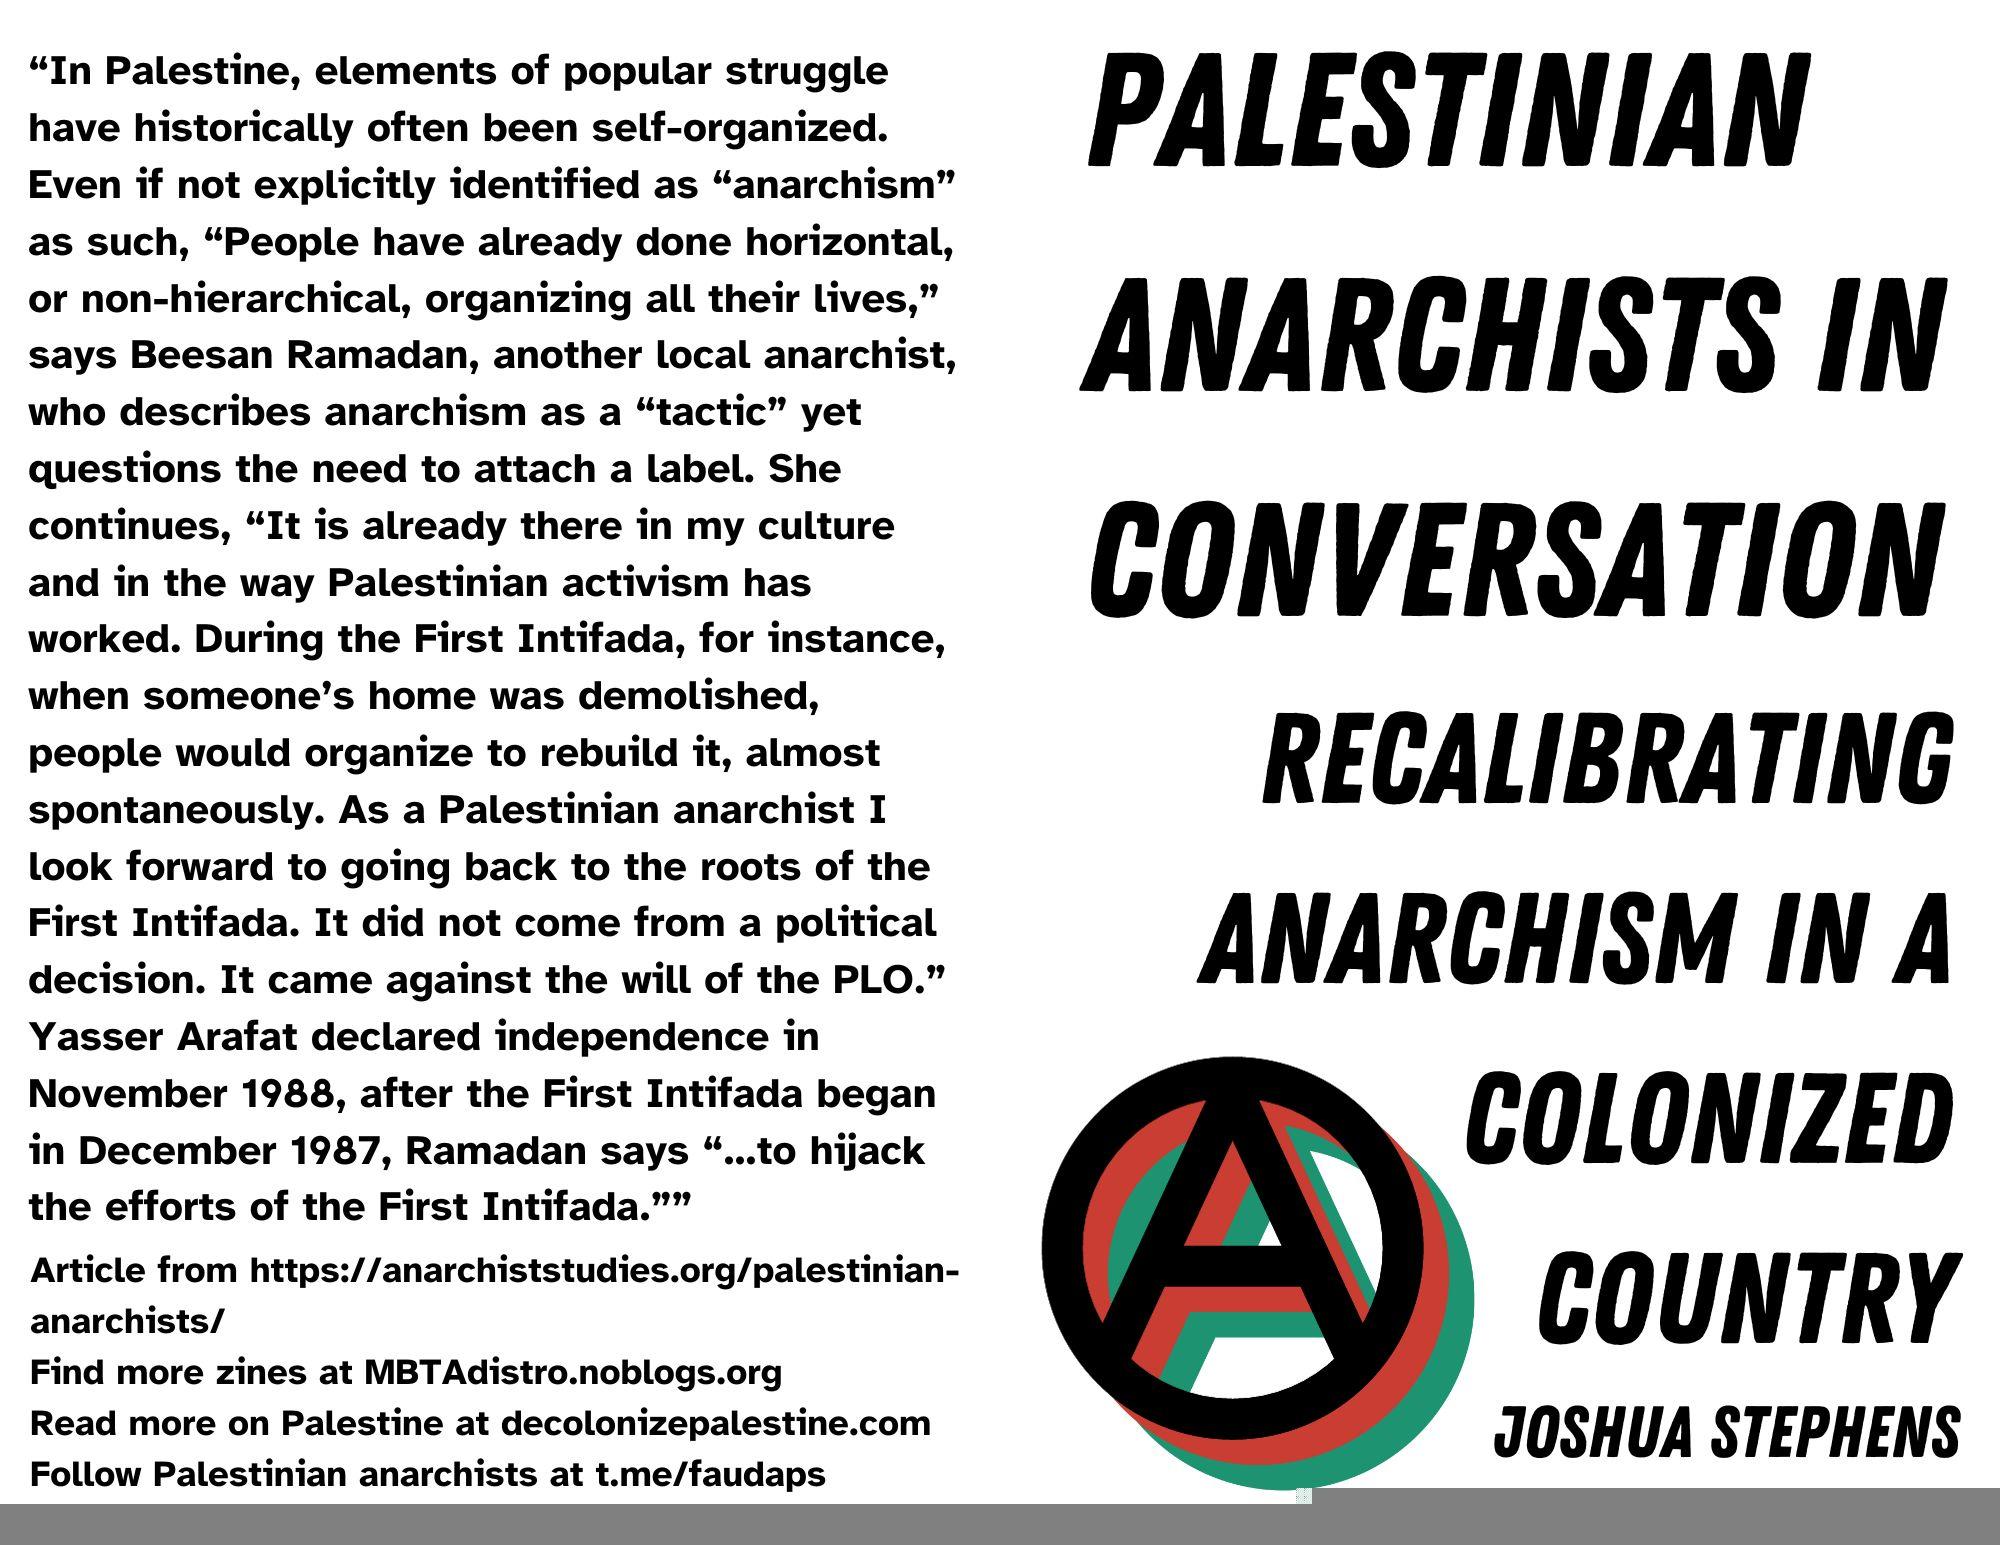 New Zine: Format of “Palestinian Anarchists in Conversation: Recalibrating Anarchism in a Colonized Country”